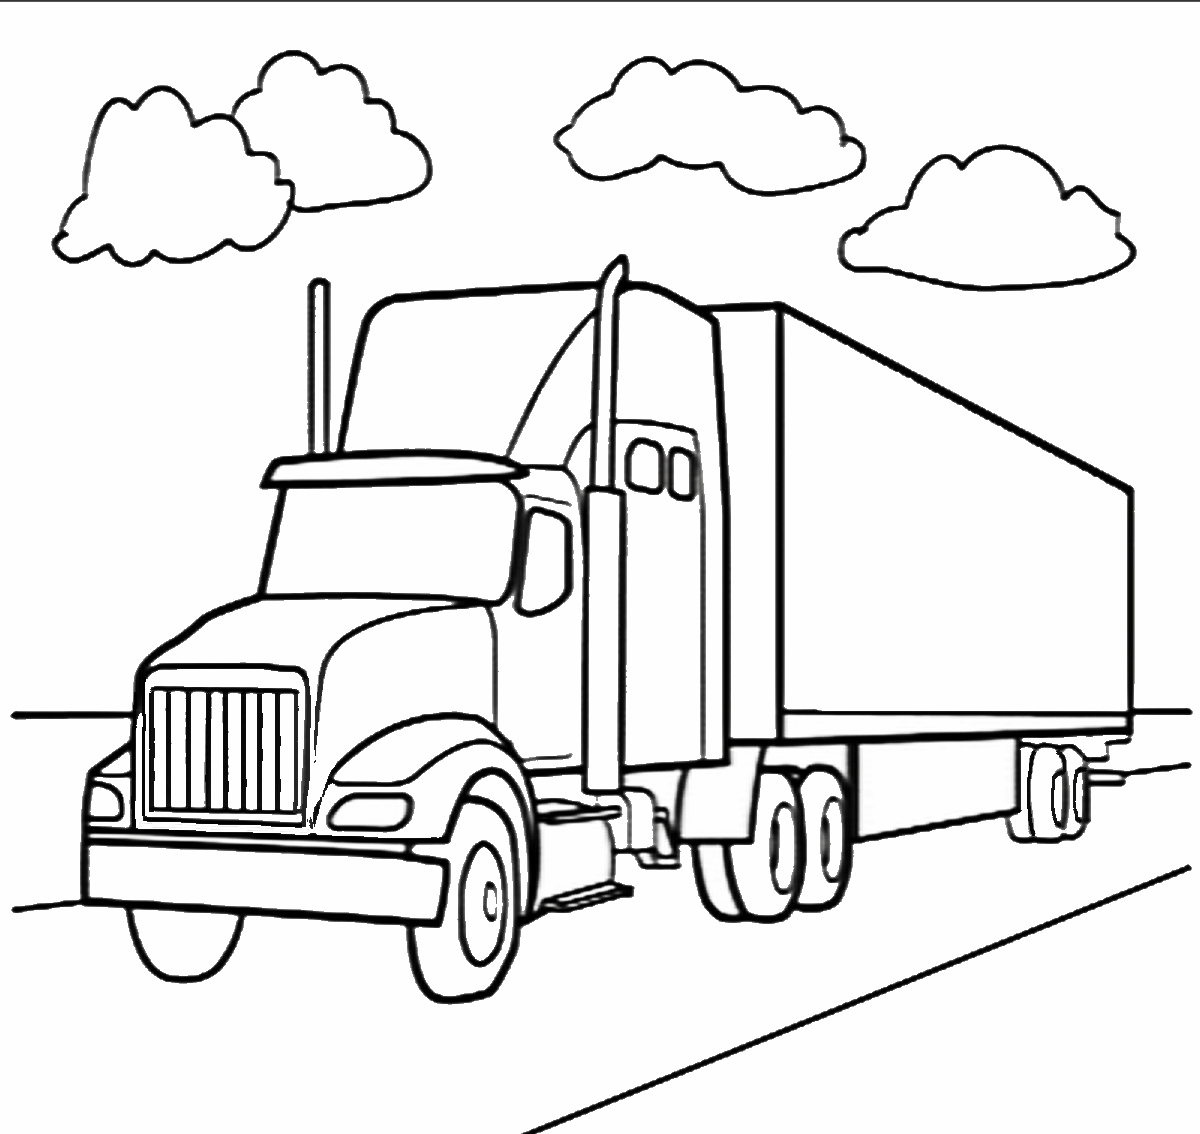 coloring pages of semi trucks 18 wheeler coloring pages coloring pages semi trucks of pages coloring 